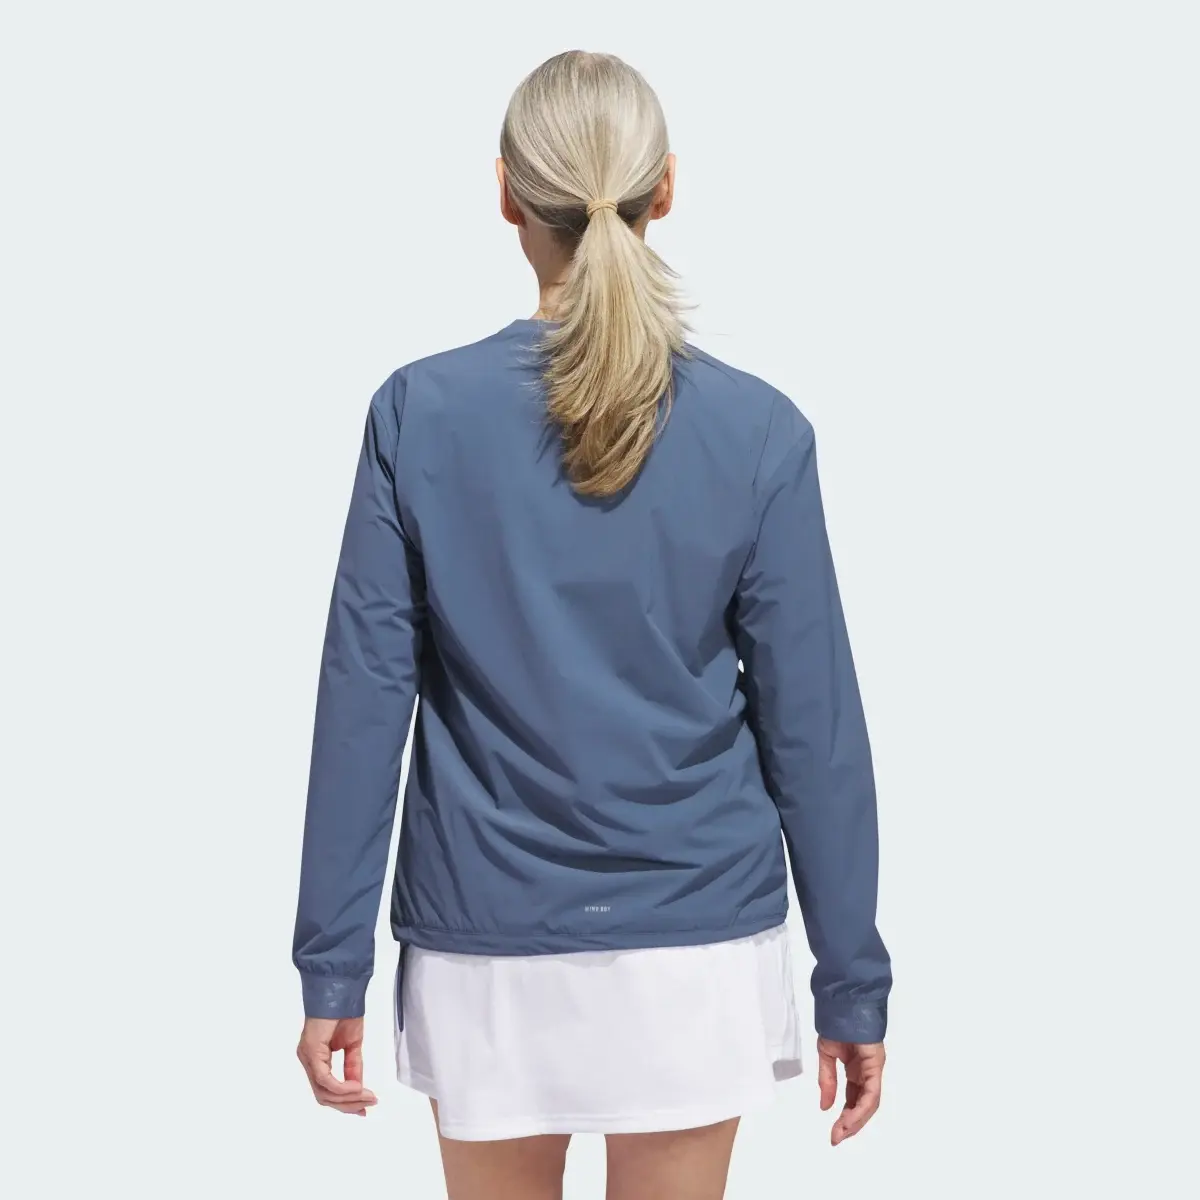 Adidas Ultimate365 Tour WIND.RDY Pullover Sweatshirt. 3